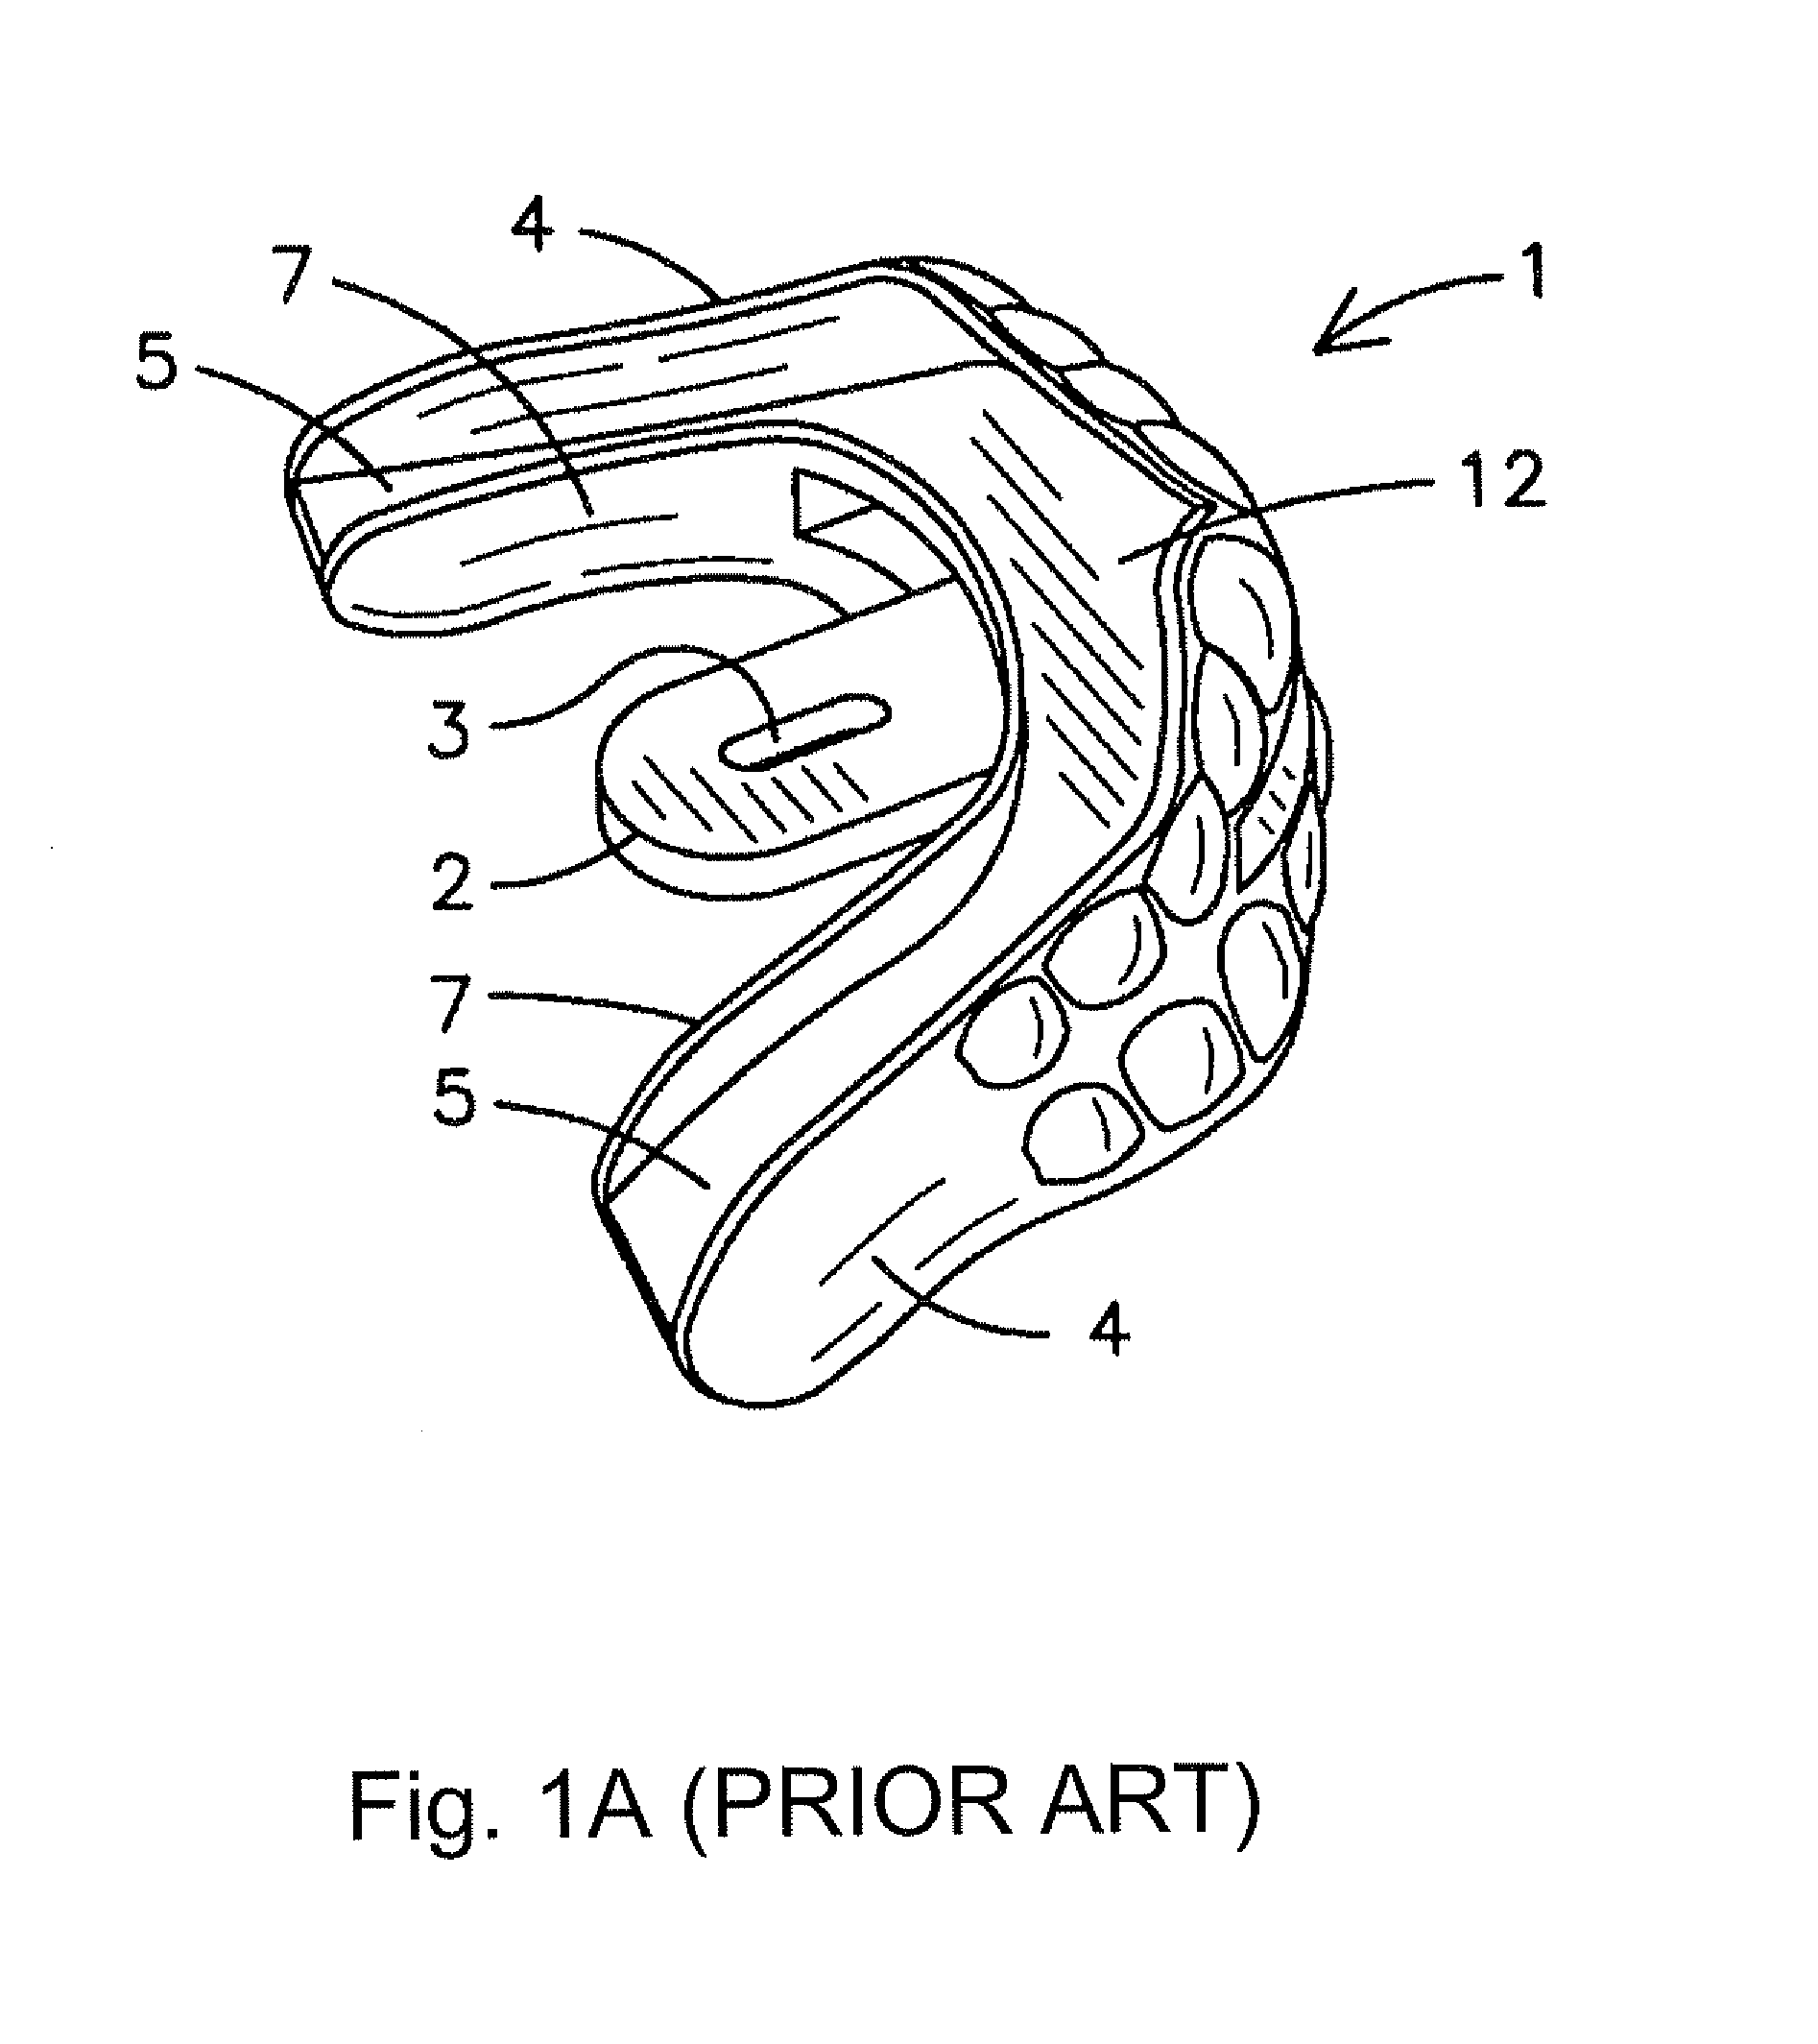 Oral tongue positioning device